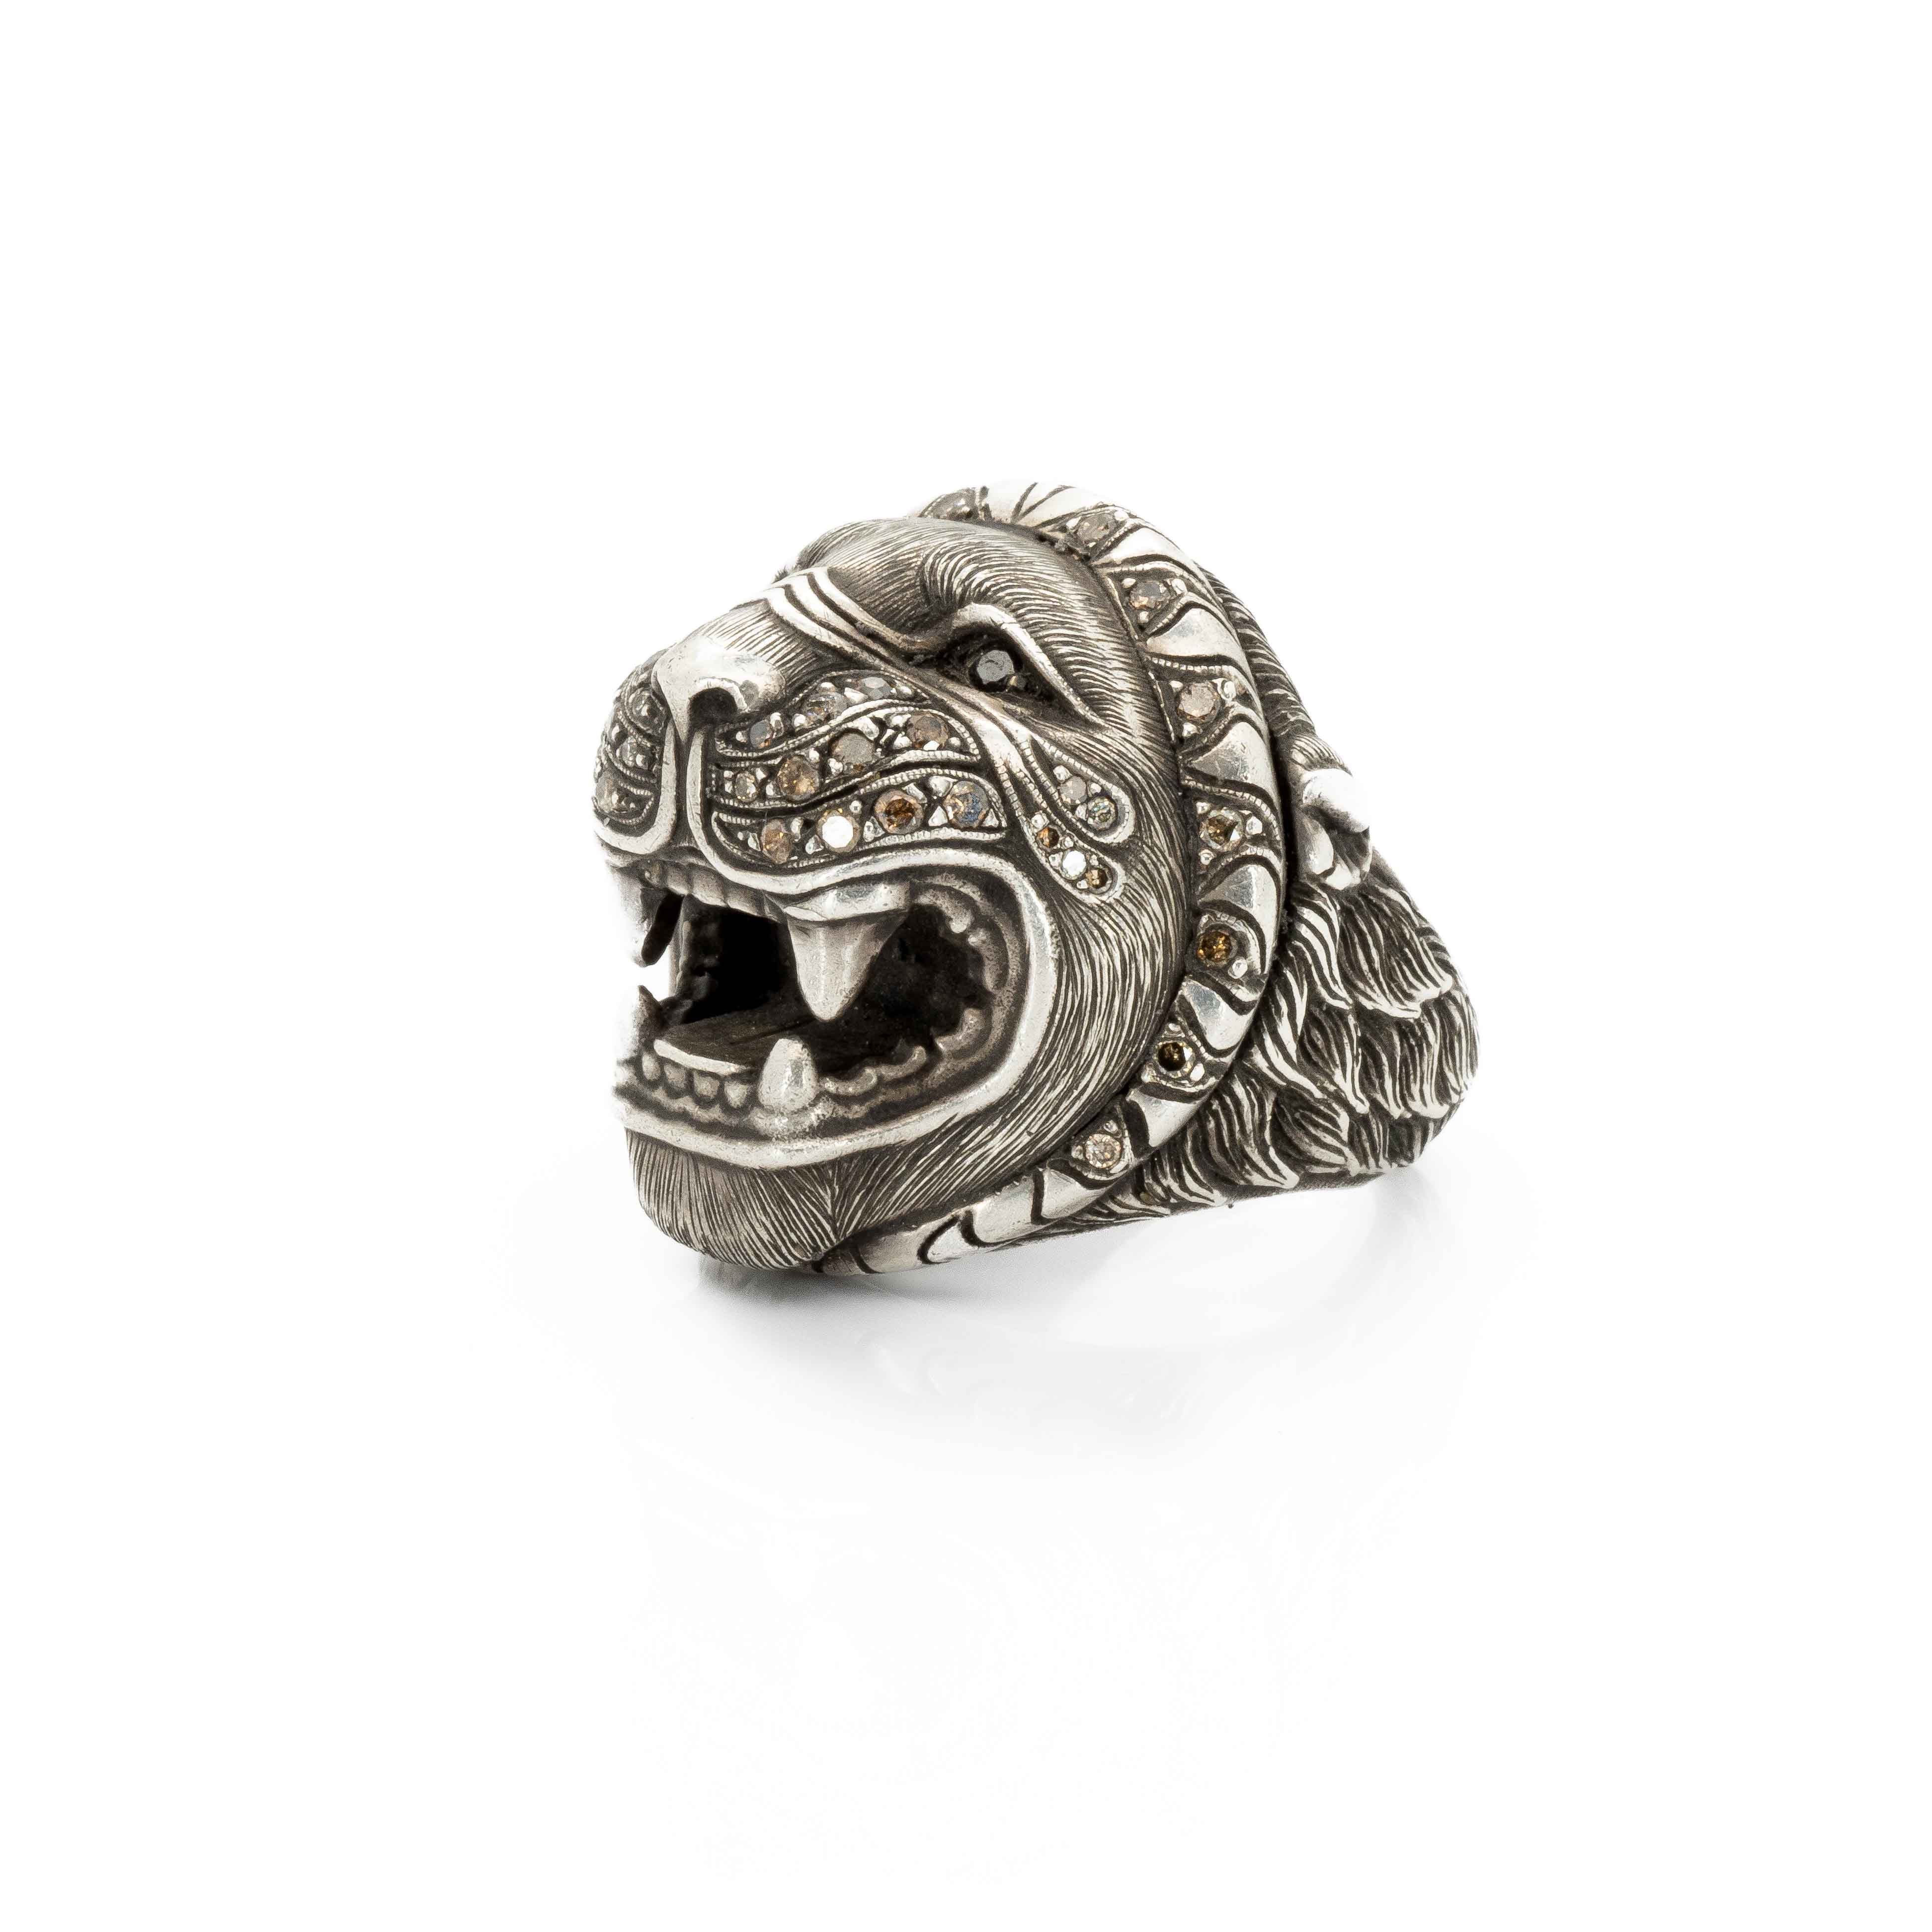 Taru Jewelry stunning lion ring is crafted from sterling silver and adorned with sparkling brown and black diamonds. The intricate details of the lion's face are hand-engraved, capturing the texture of its fur and the fierce expression of its eyes.